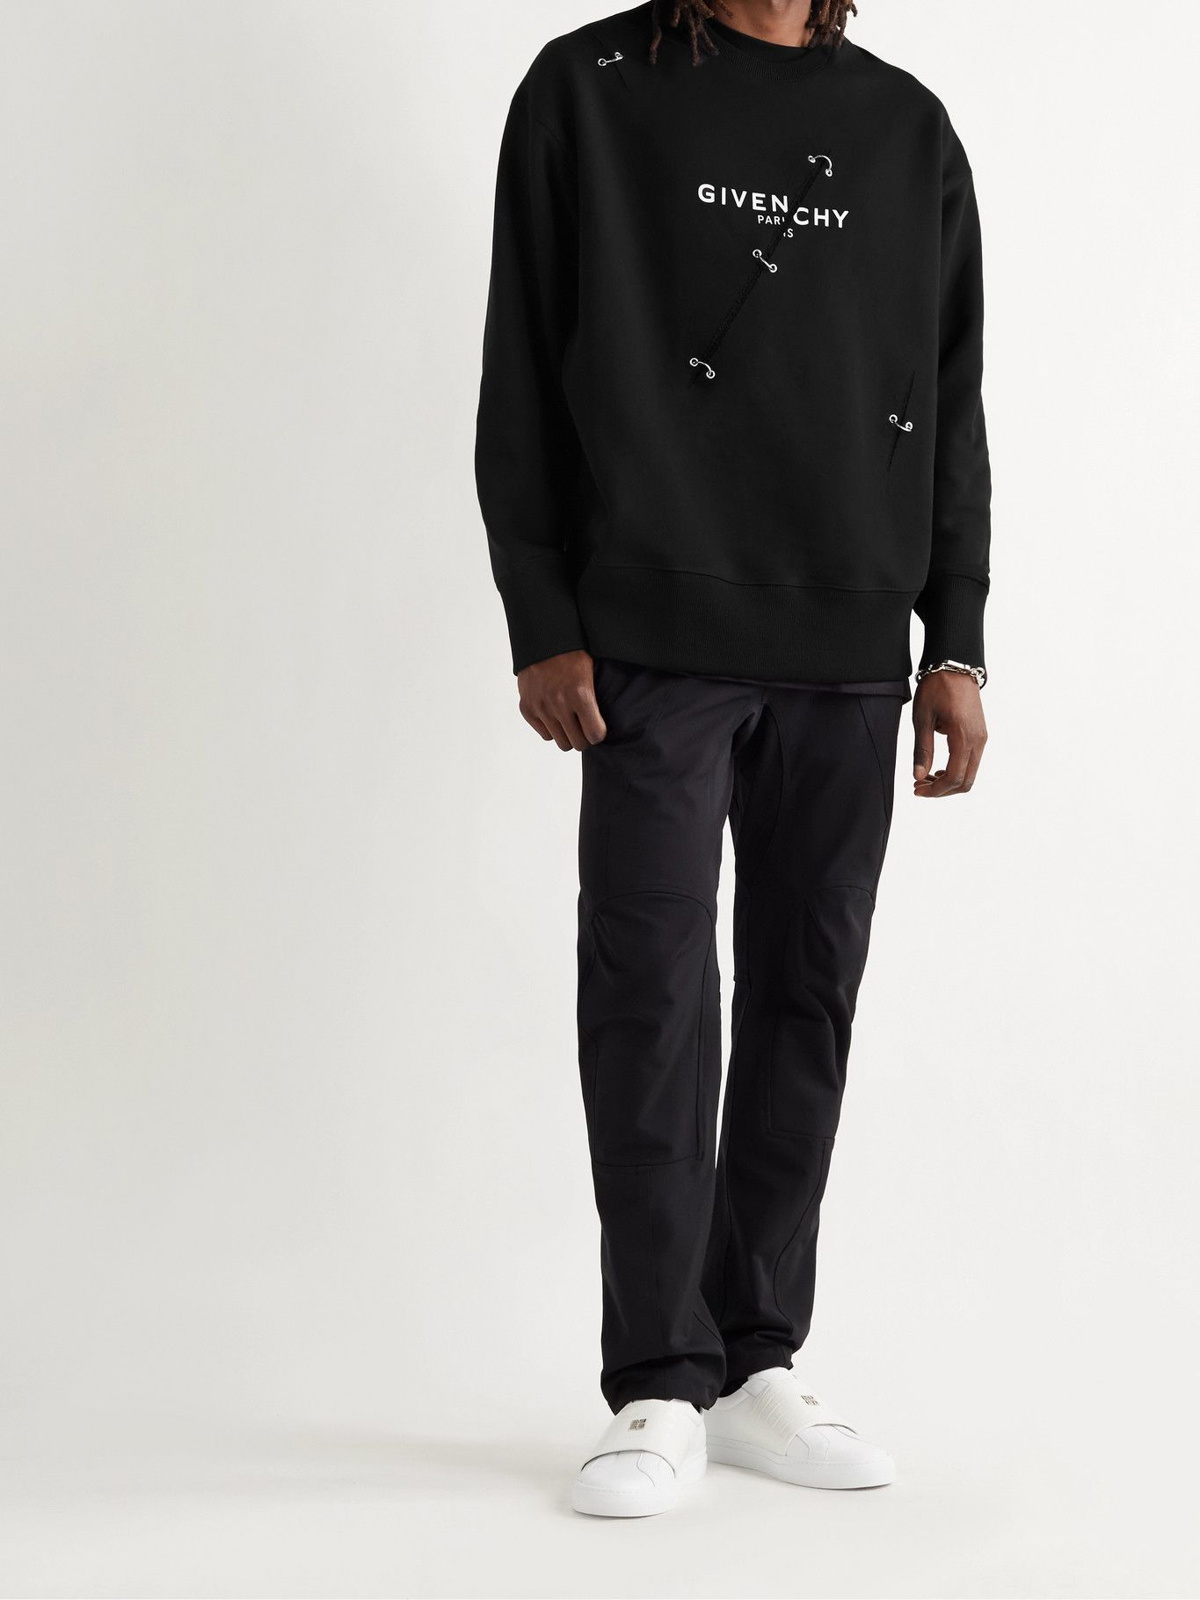 Black Printed Lounge Pants by Givenchy on Sale